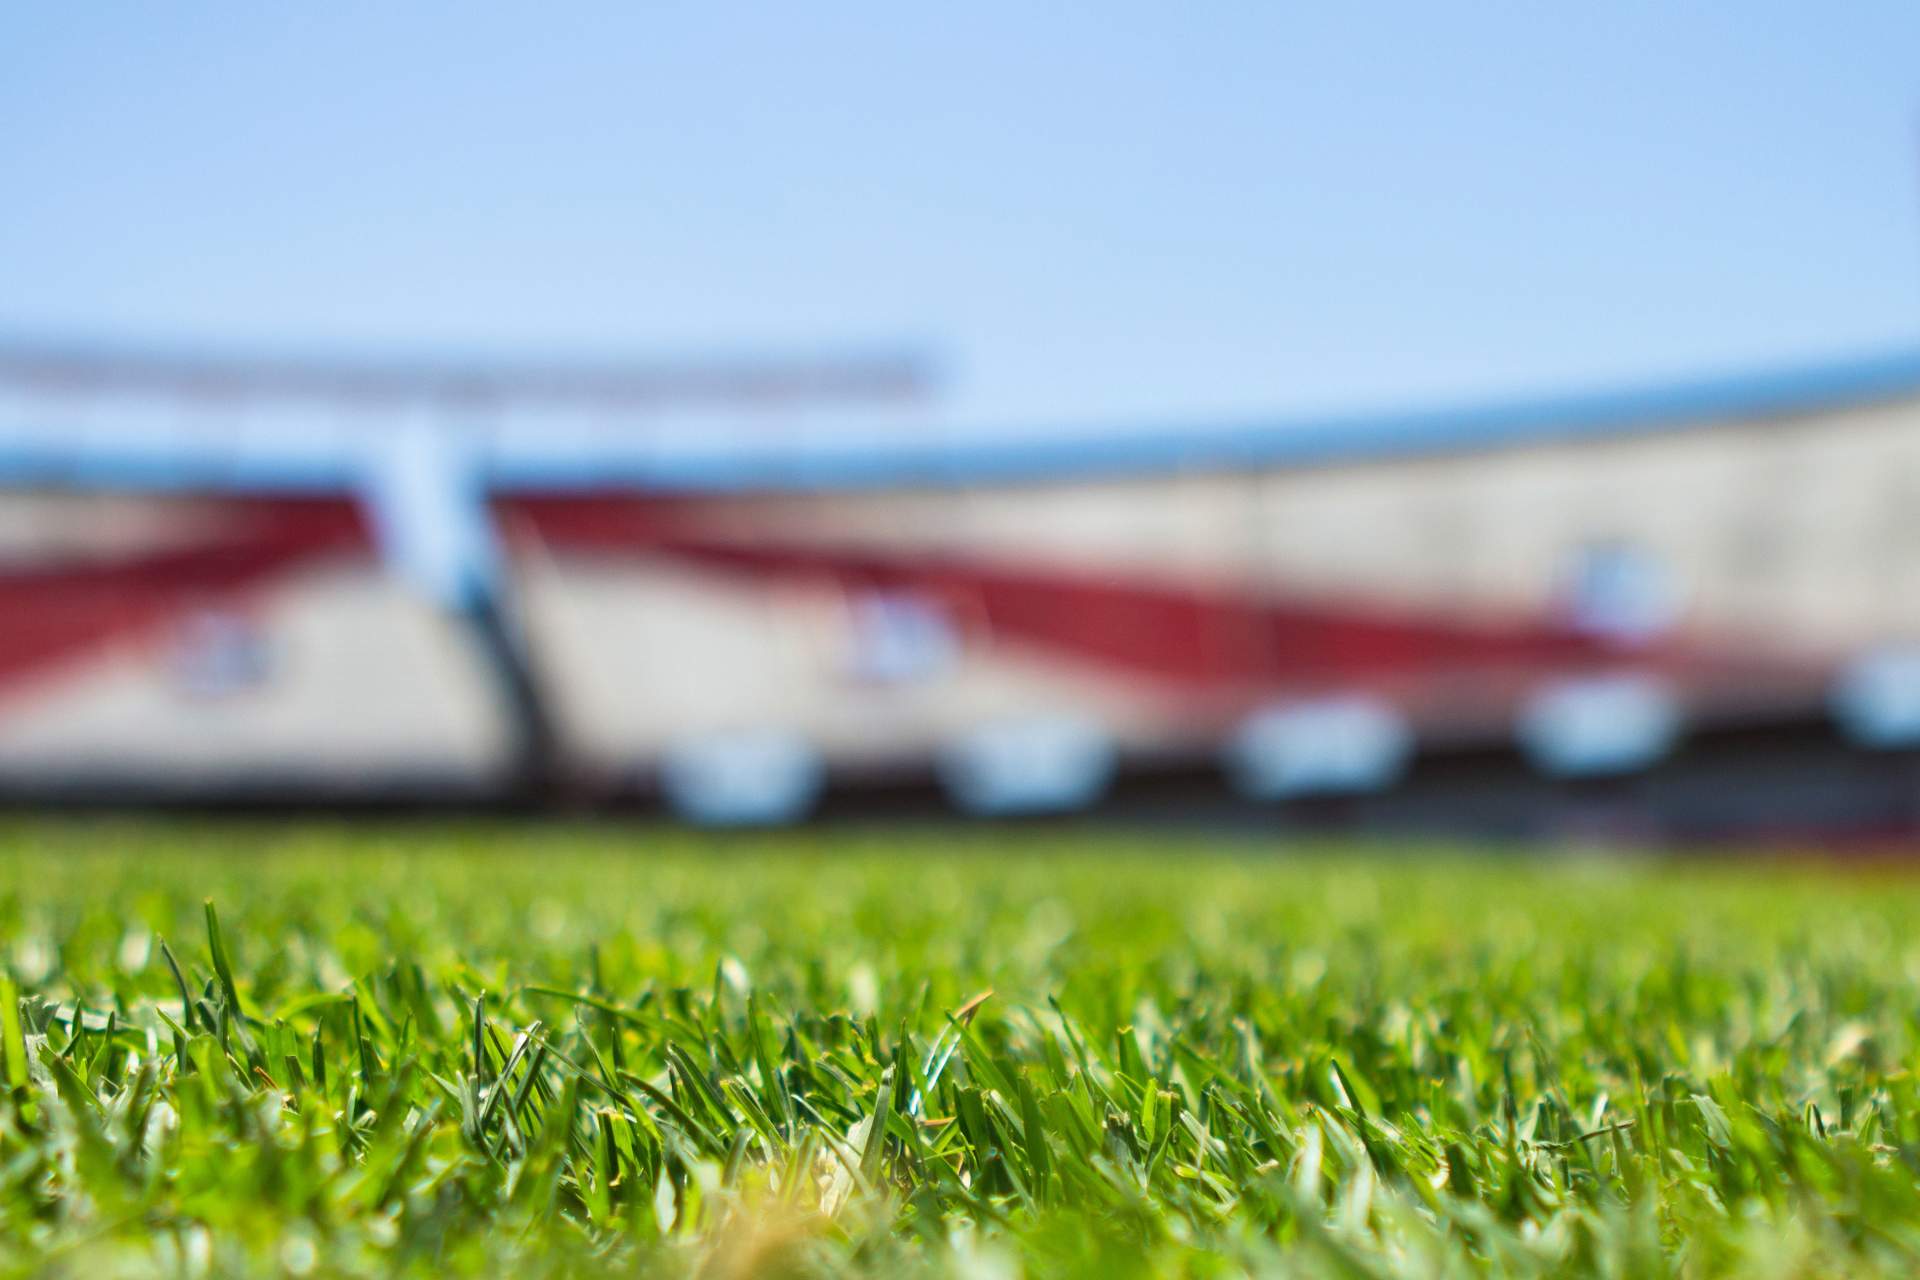 Close-up of the turf in a football stadium.